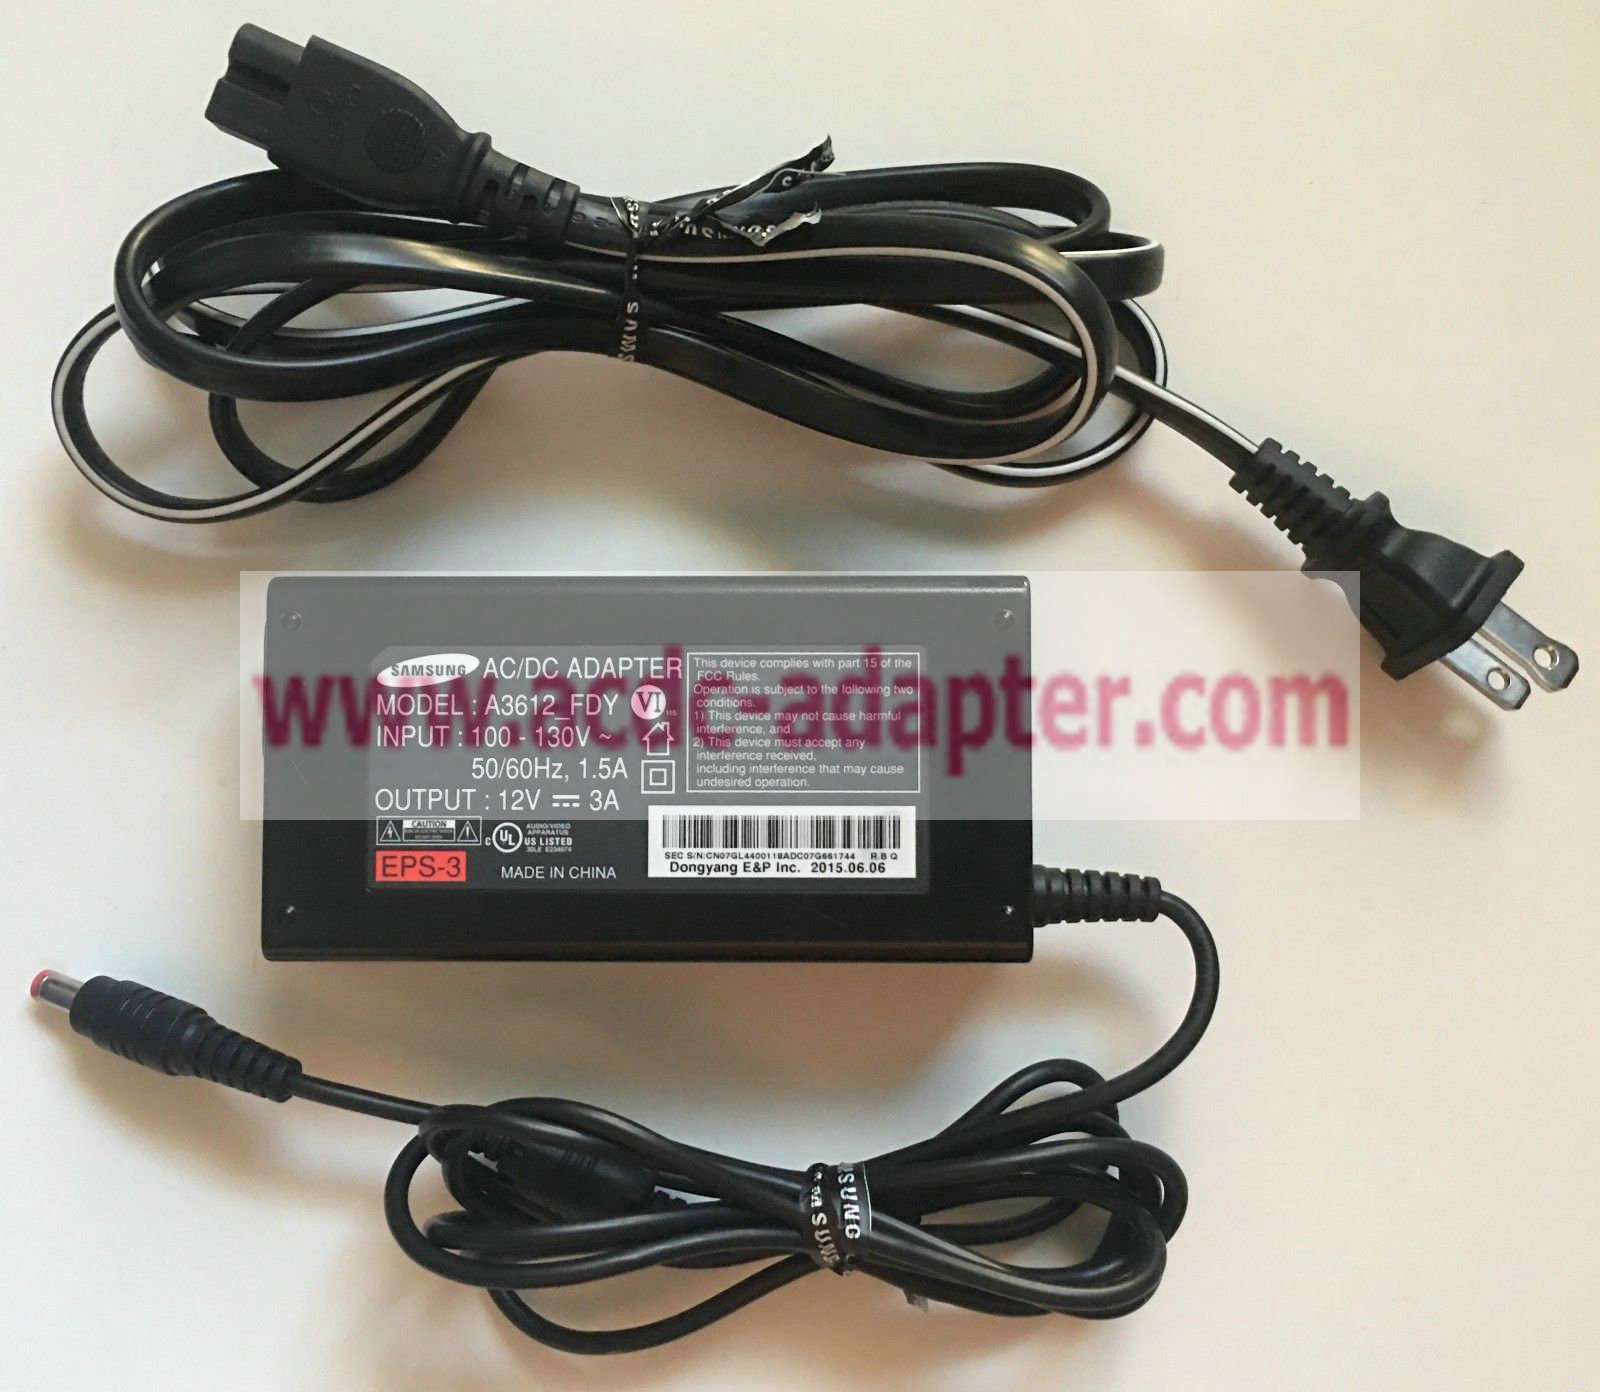 Brand new SAMSUNG A3612_FDY 12VDC 3A AC/DC Adapter Power Supply Charger EPS-3